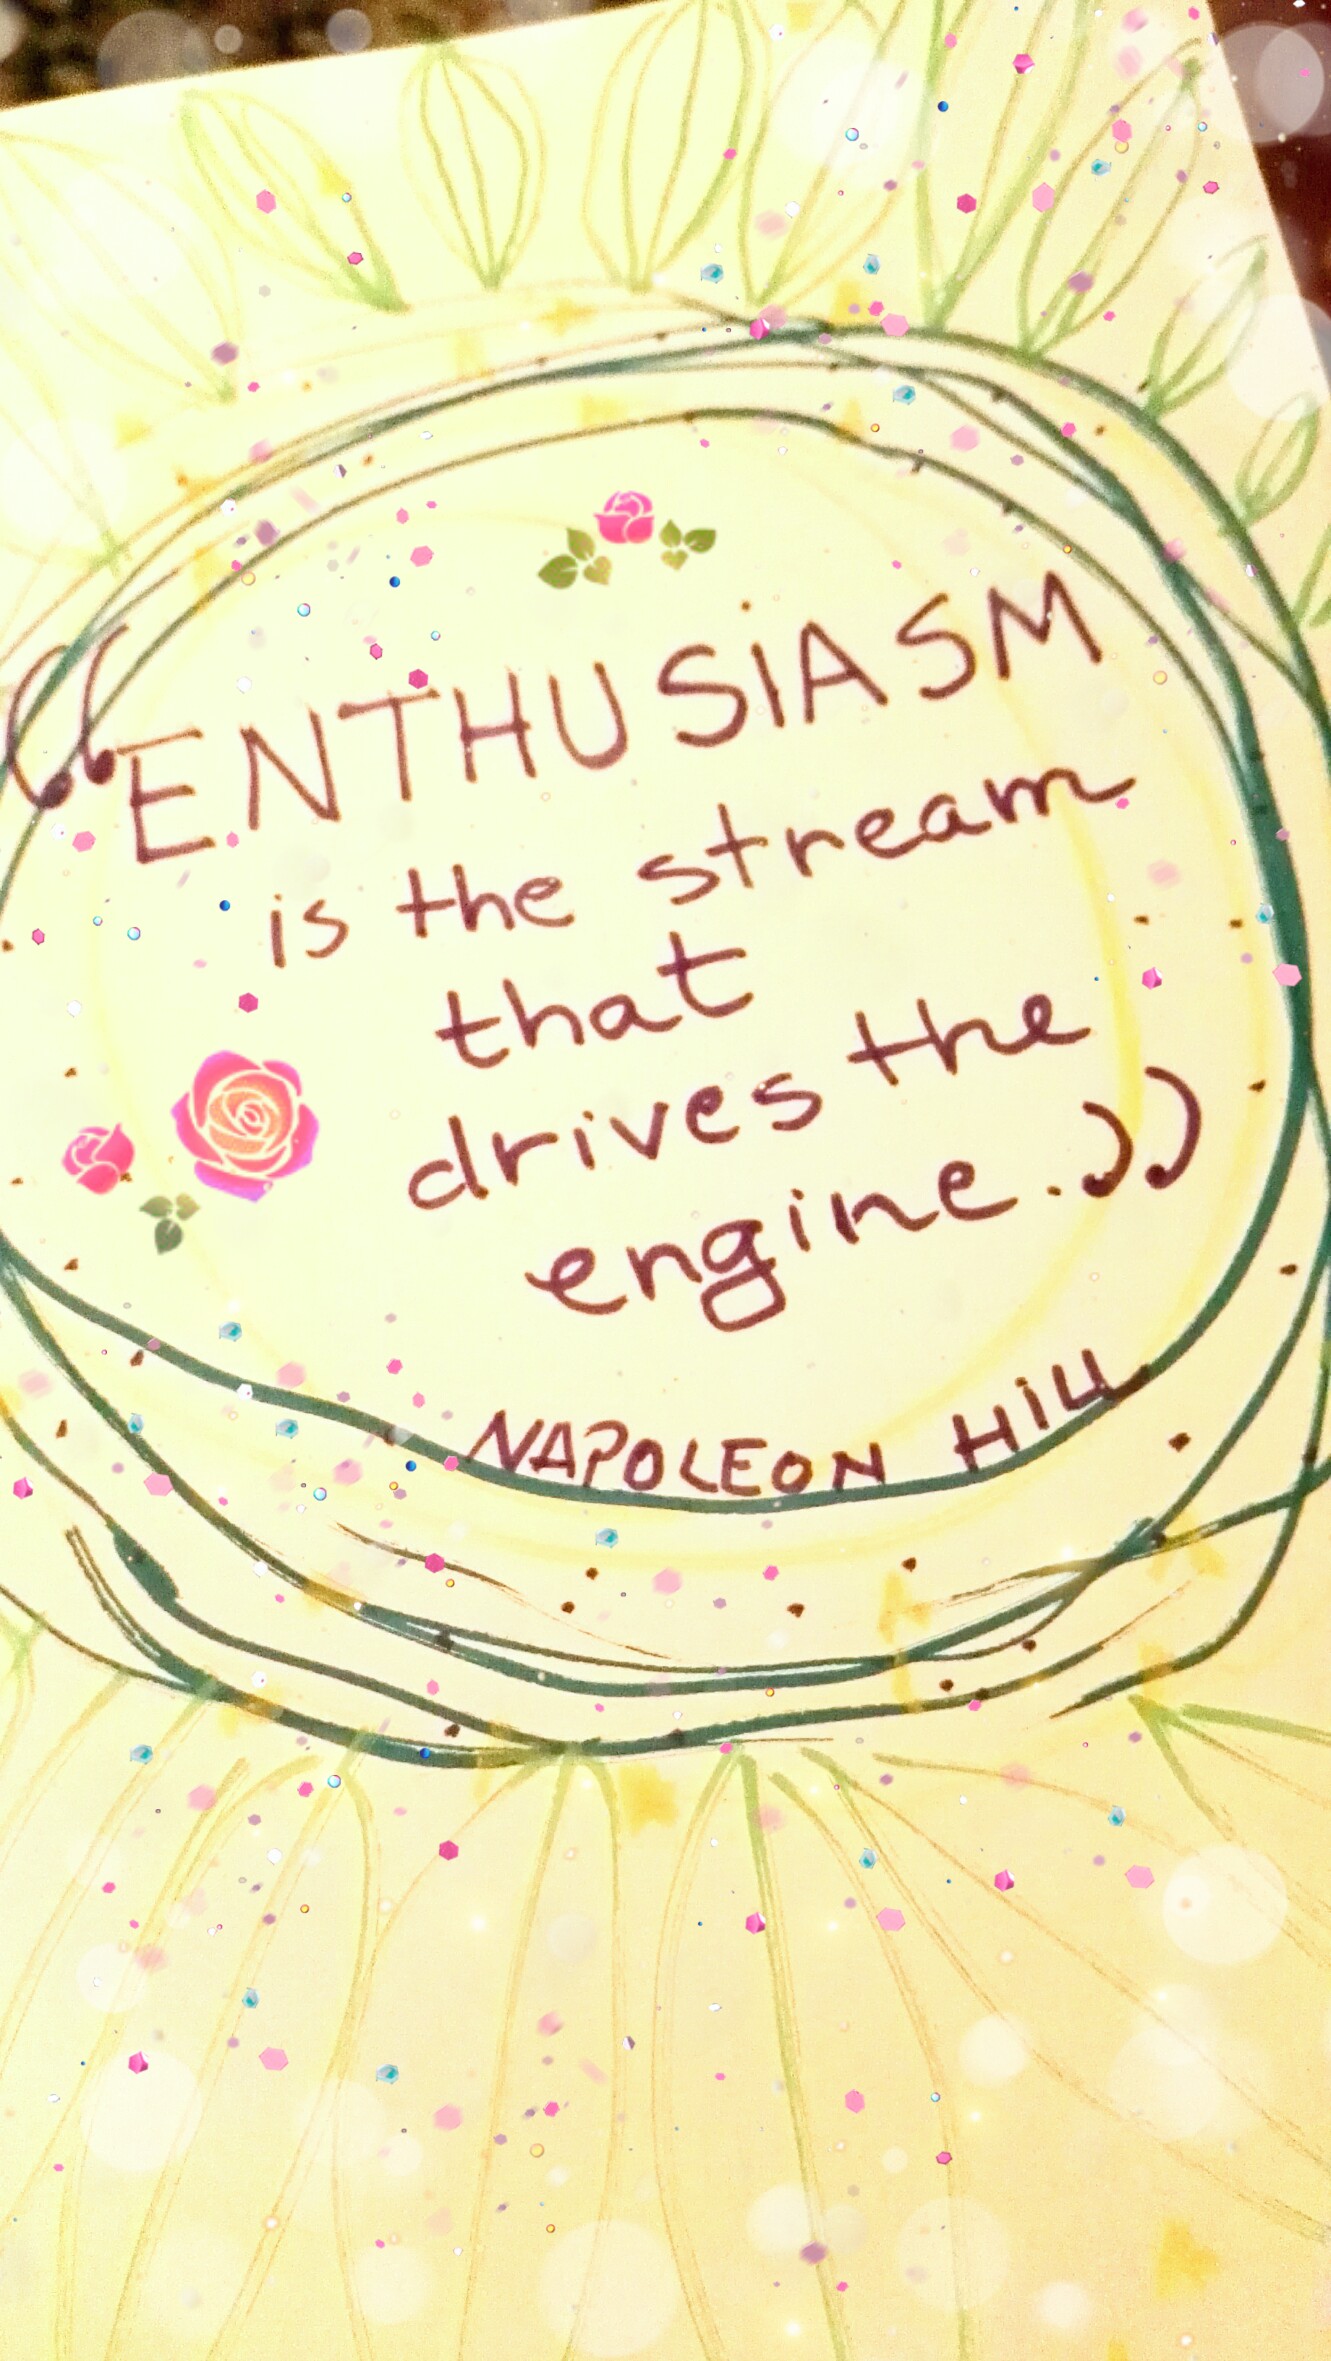 ENTHUSIASM is the stream that drives the engine -- Napoleon Hill - - quoted pages by Cristina Parus @ creativemag.ro